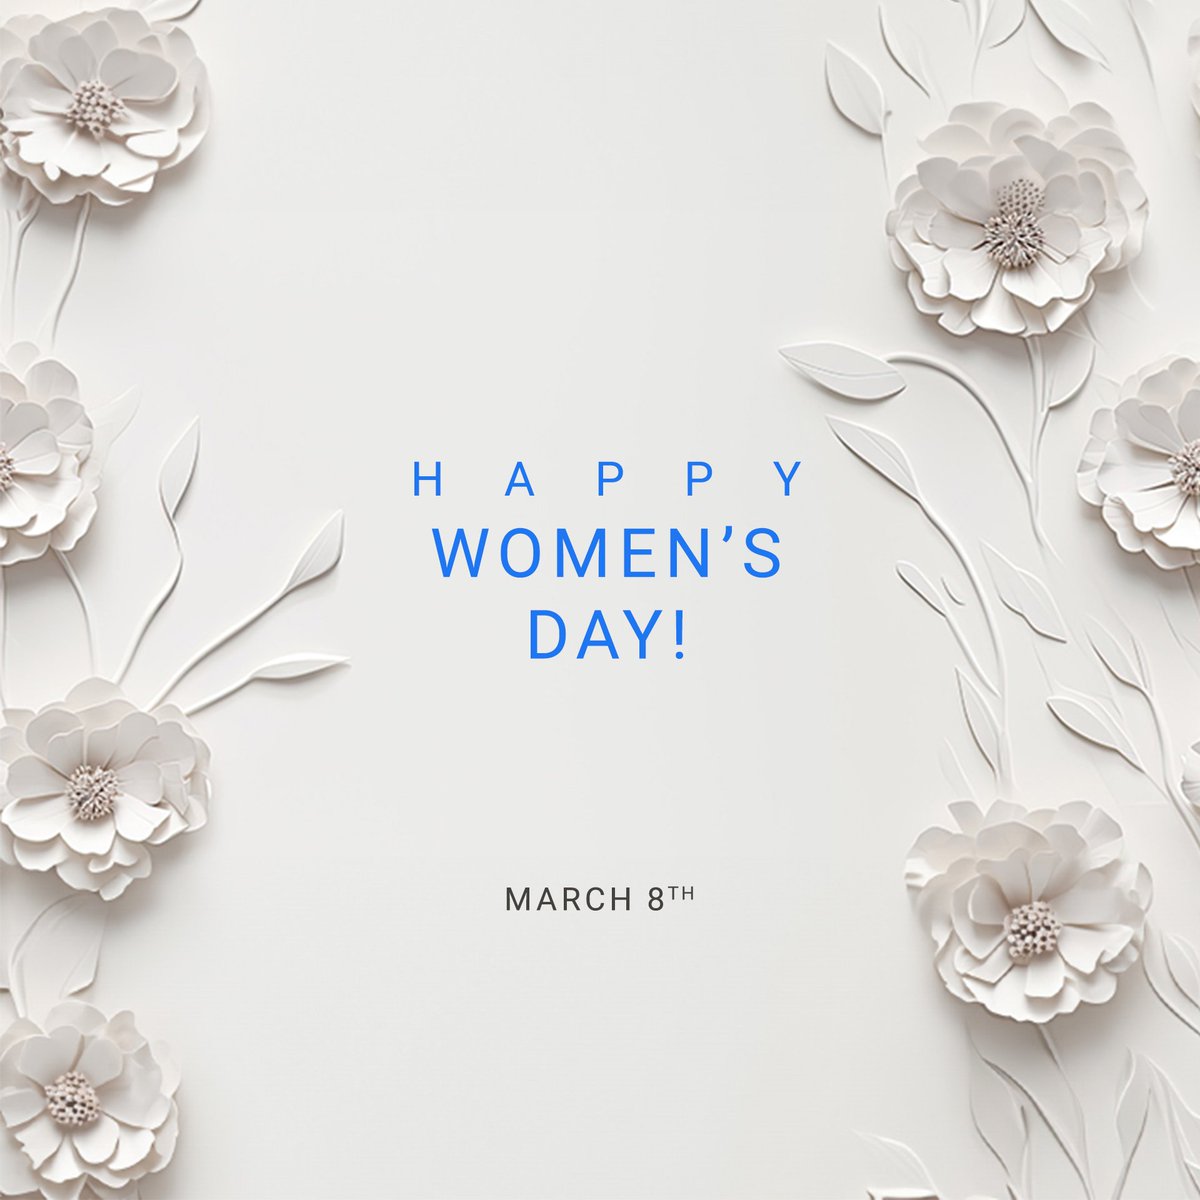 Cheers to the women shaping the future of #FinTech! 💼🌸 Thank you for your dedication, innovation, and invaluable contributions. Your presence drives our success forward. #InternationalWomensDay